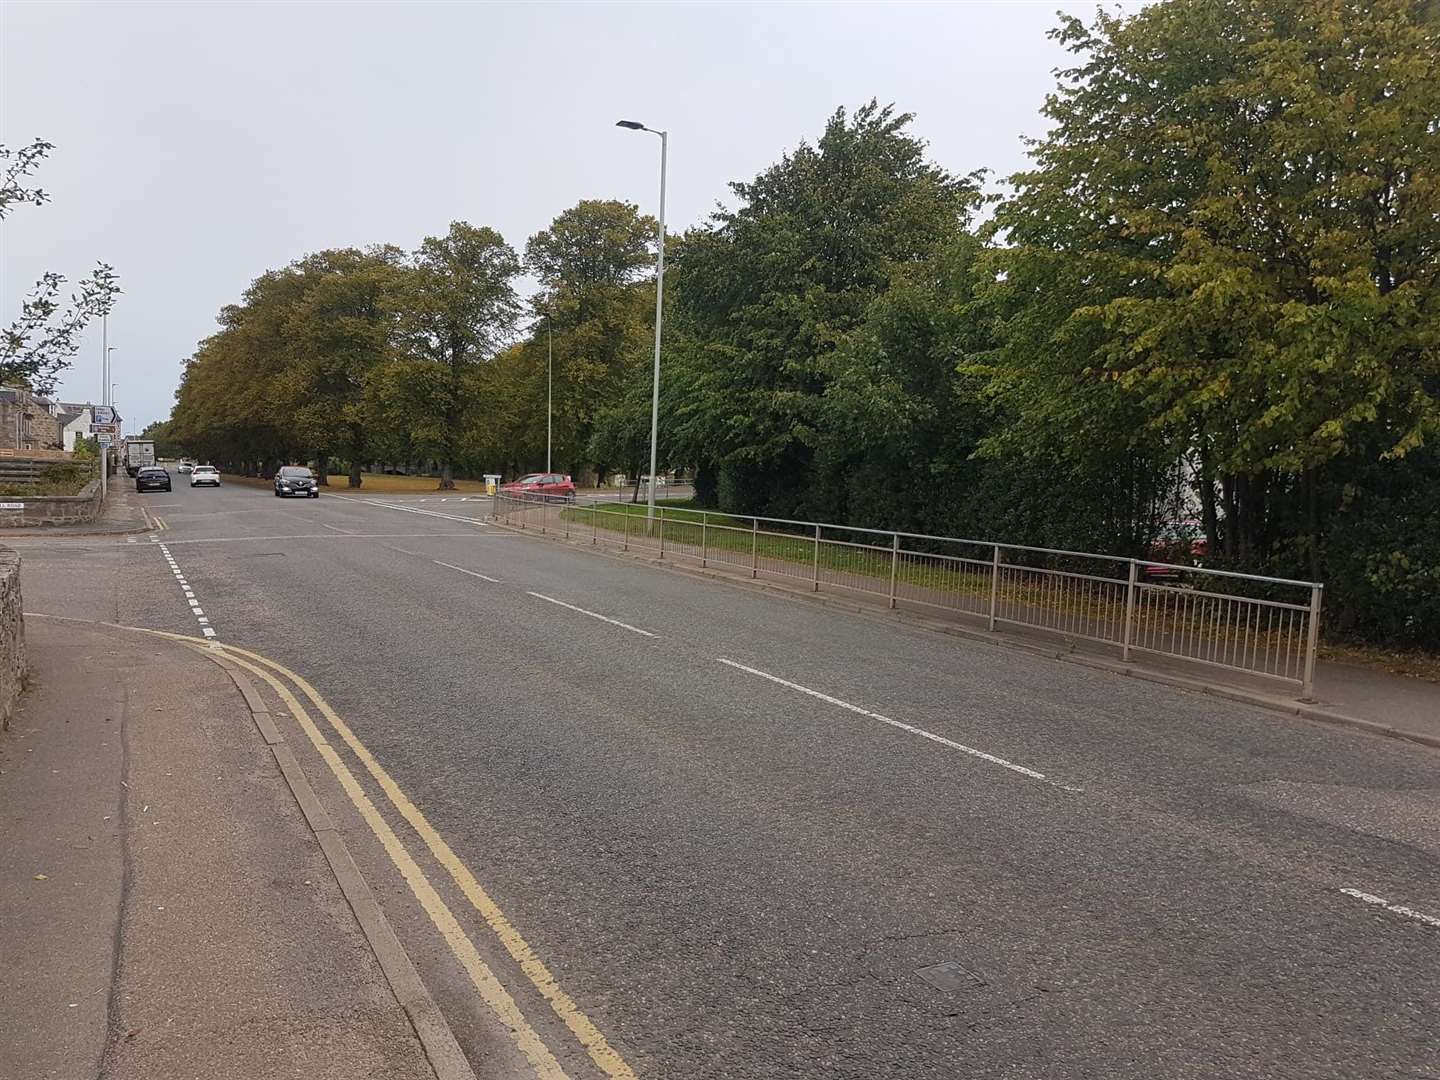 The junction of Grantown Road, Thornhill Road and Orchard Road can be dangerous for young children crossing on their own.